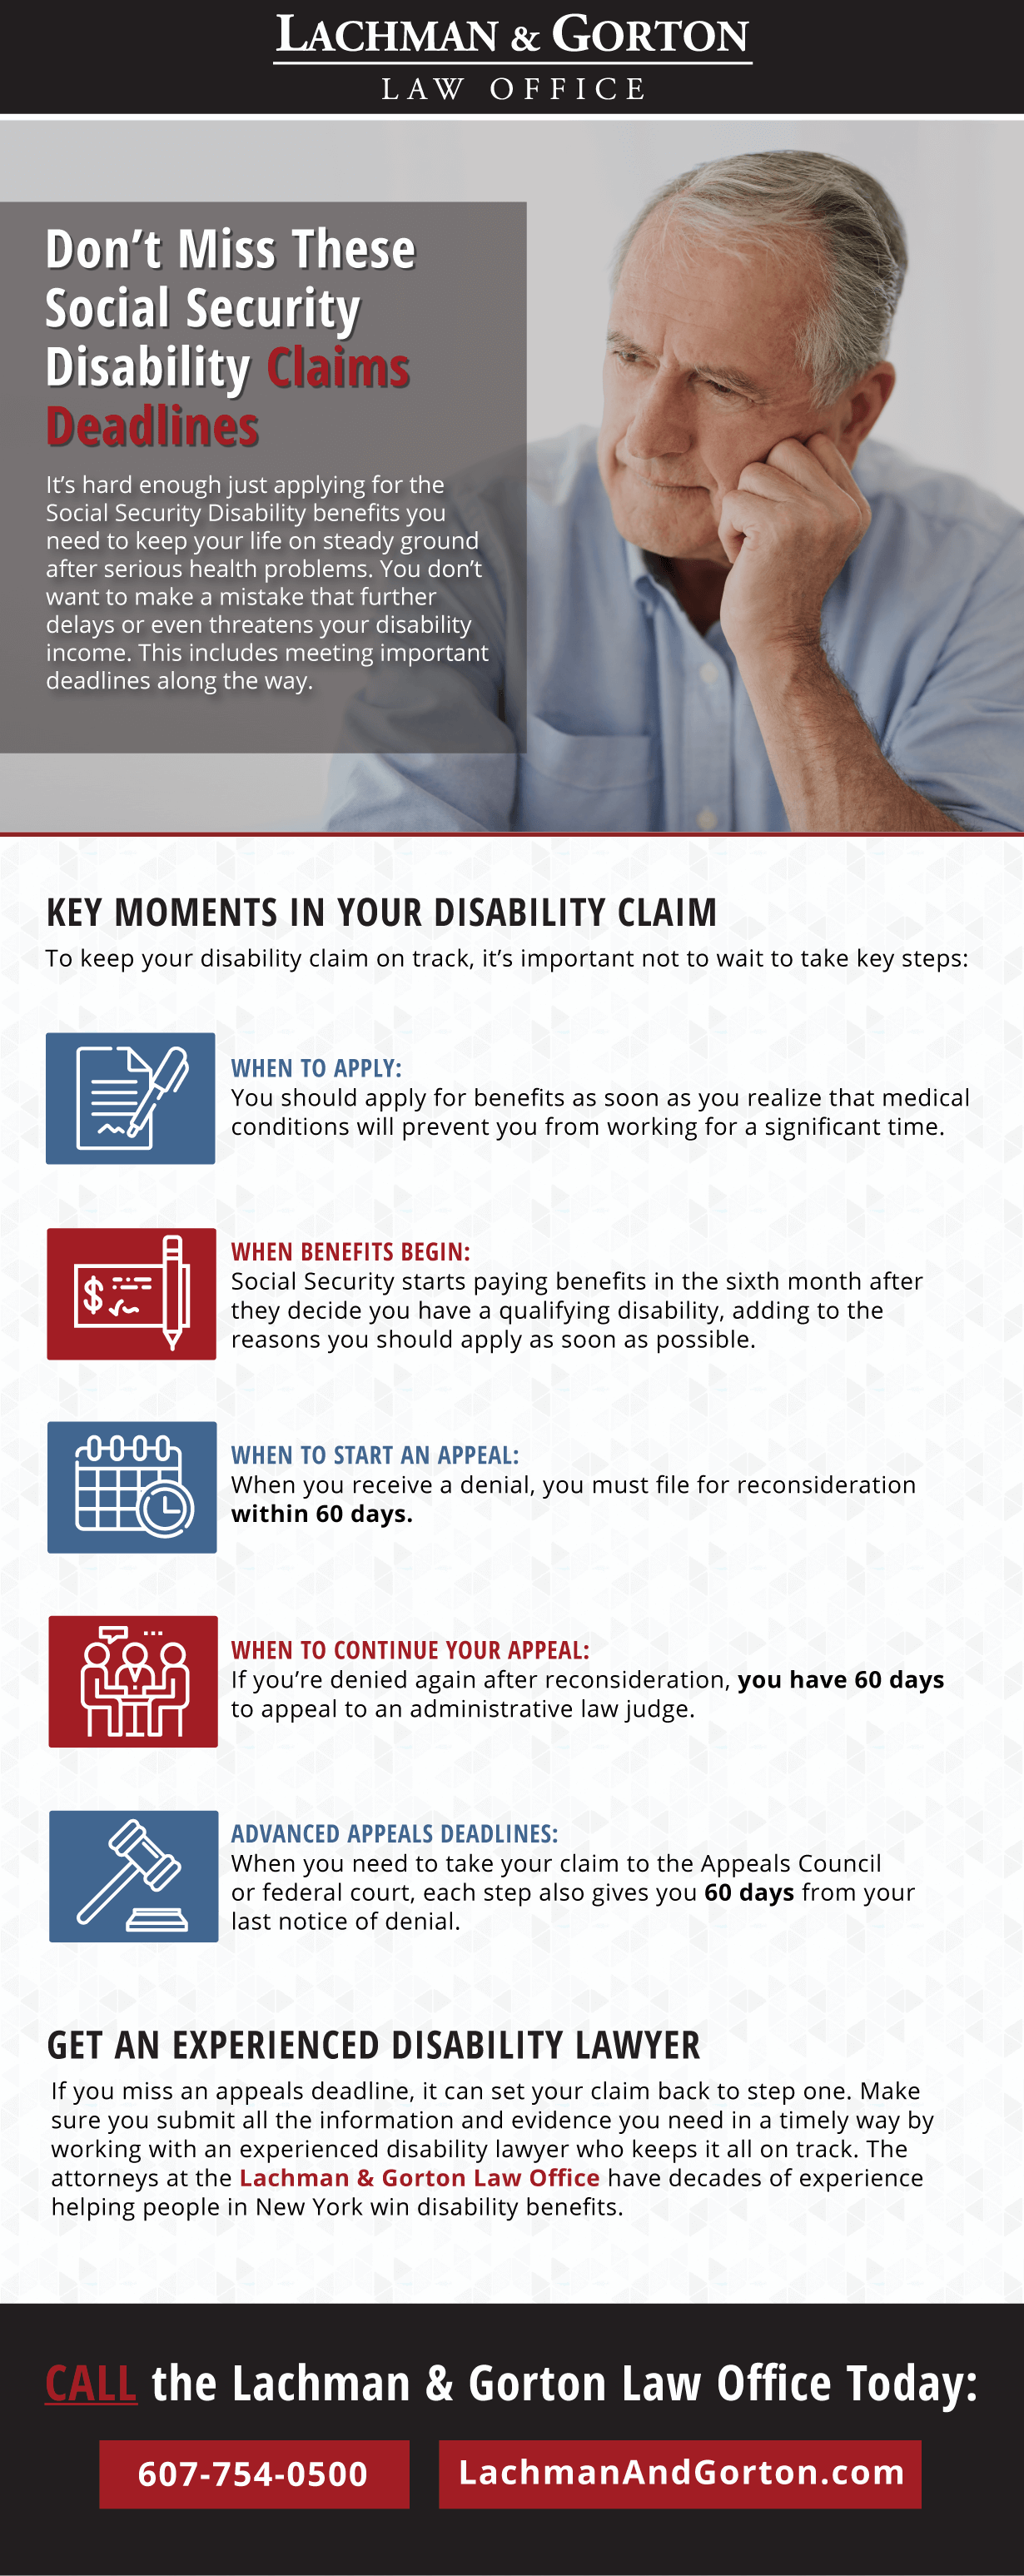 An infographic about social security disability claim deadlines.